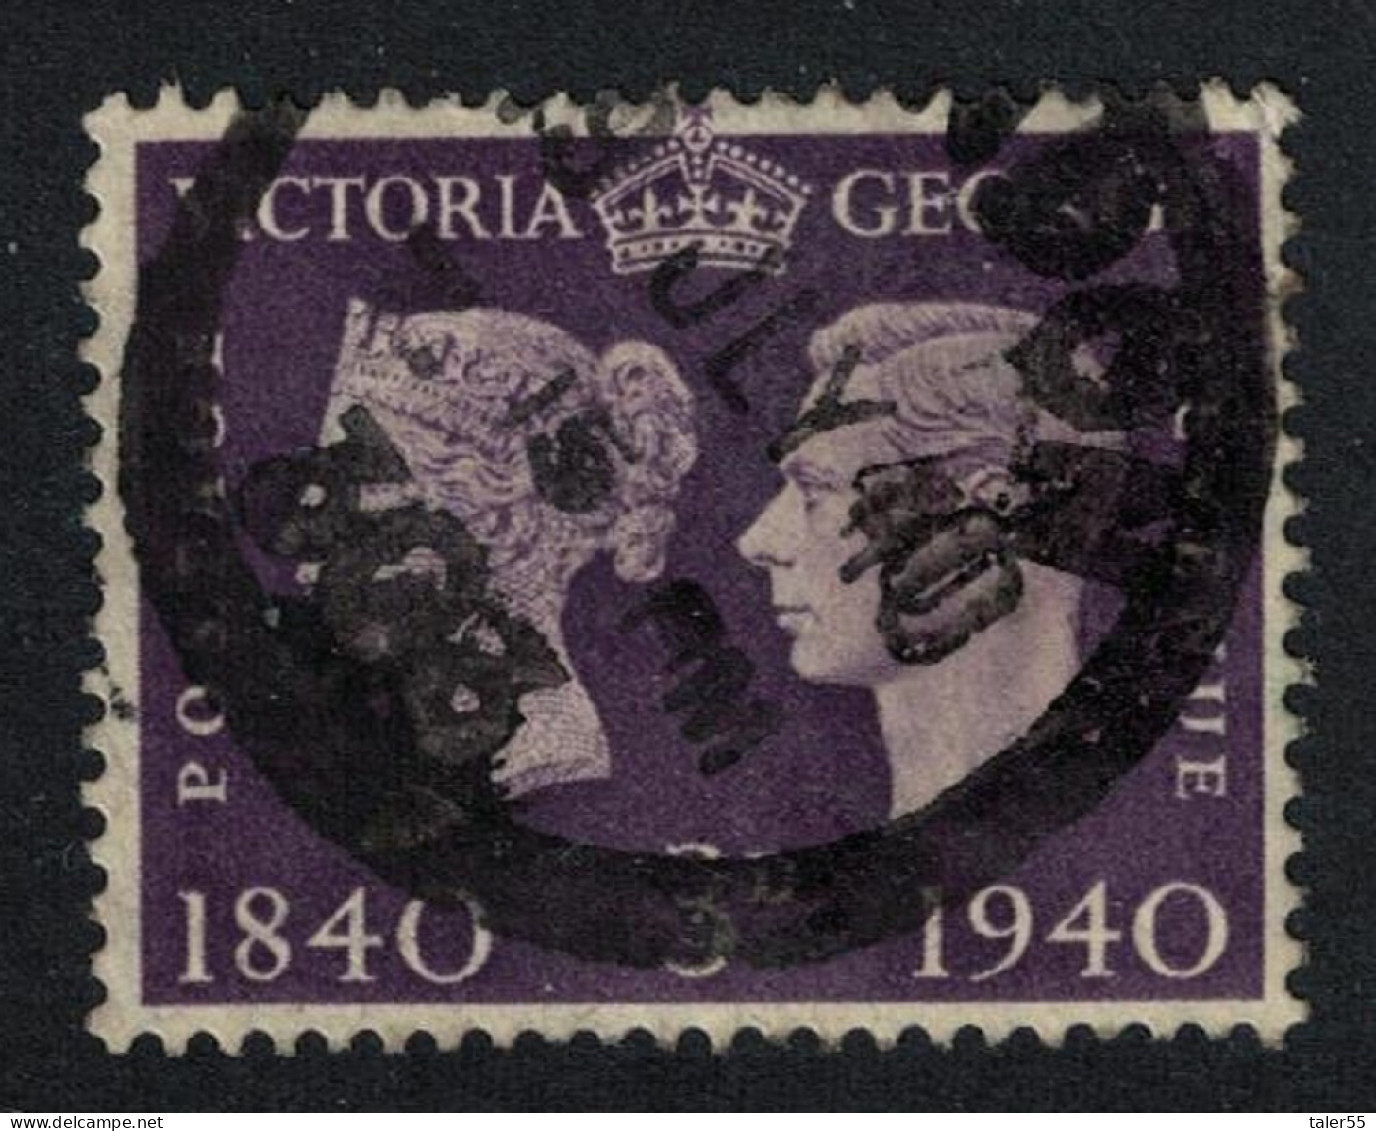 Great Britain Centenary Of First Adhesive Postage Stamps 3d Key Value 1940 Canc SG#484 - Gebraucht